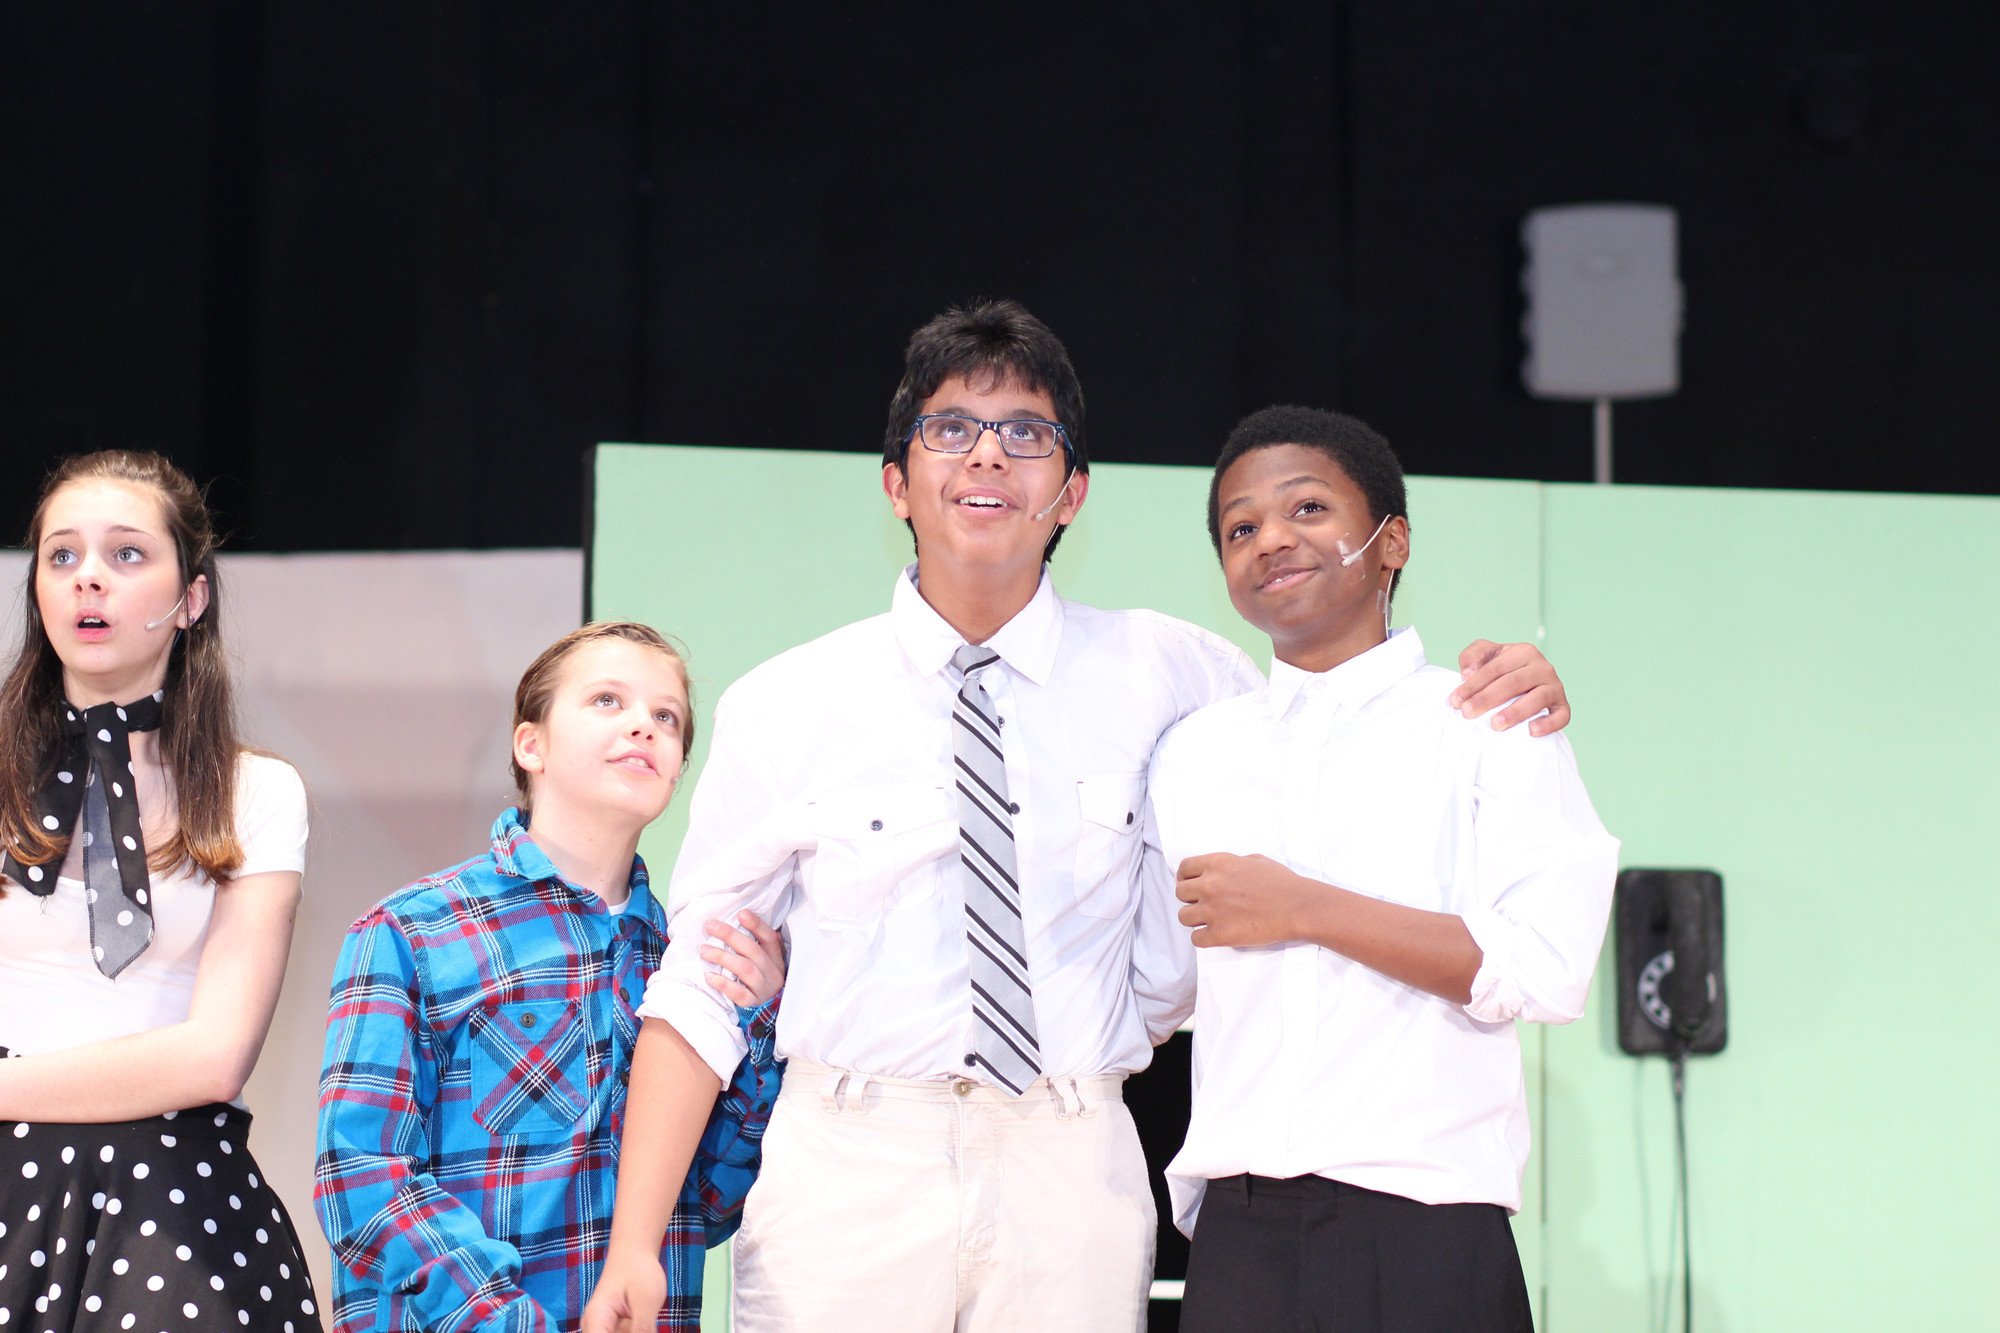 The MacAfee Family dreamed of being on the Ed Sullivan Show.  The students who played them, from left, were Perez, eighth grade, Gabriel Vukelic, sixth grade,  Ali Alsaif, eighth grade, and Joshua Davis, eighth grade.